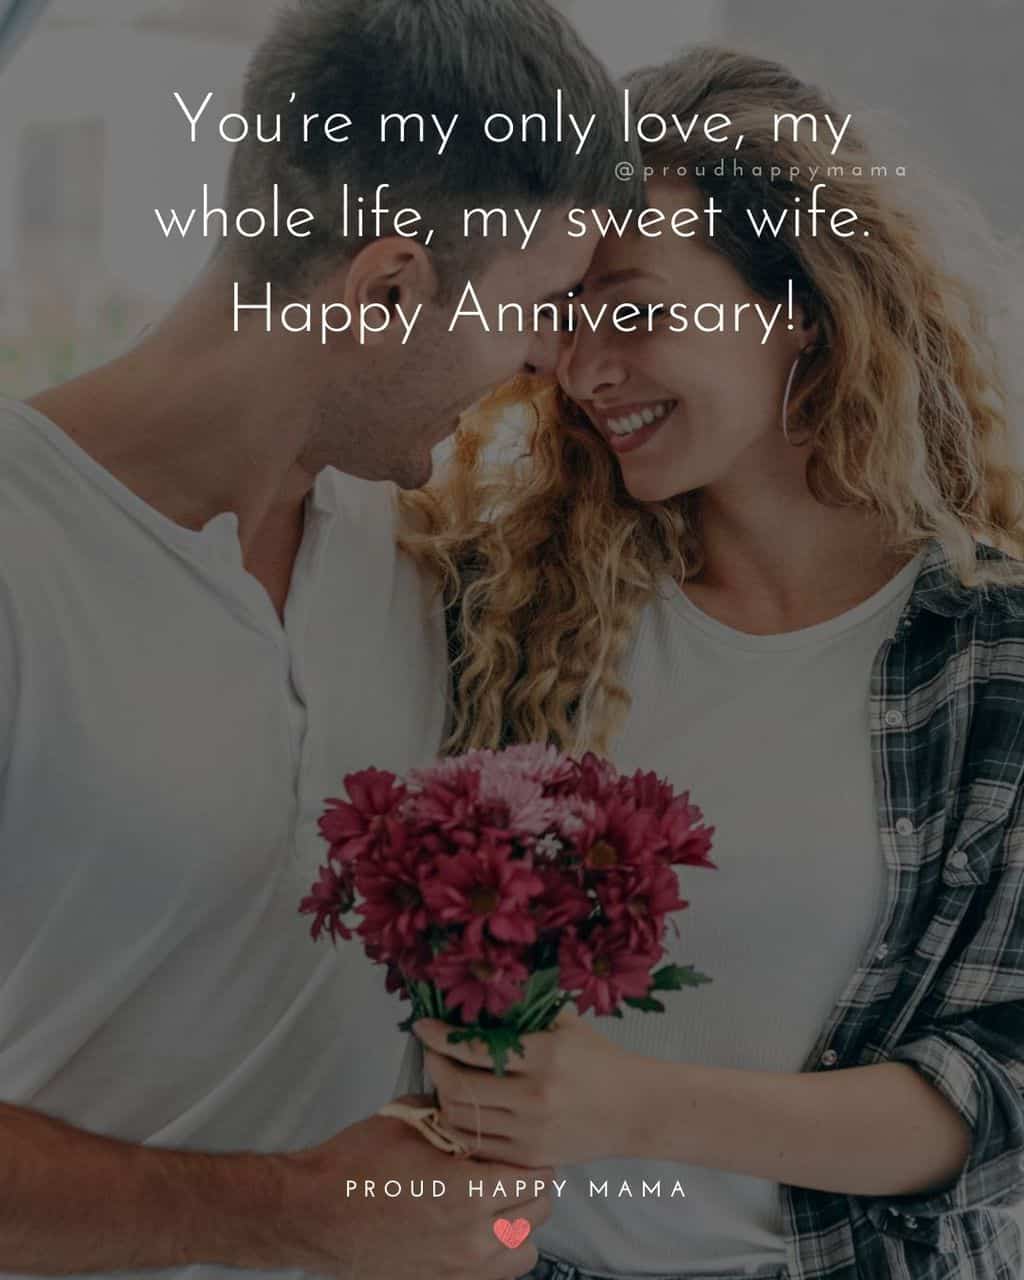 Wedding Anniversary Wishes For Wife - You’re my only love, my whole life, my sweet wife. Happy Anniversary!’